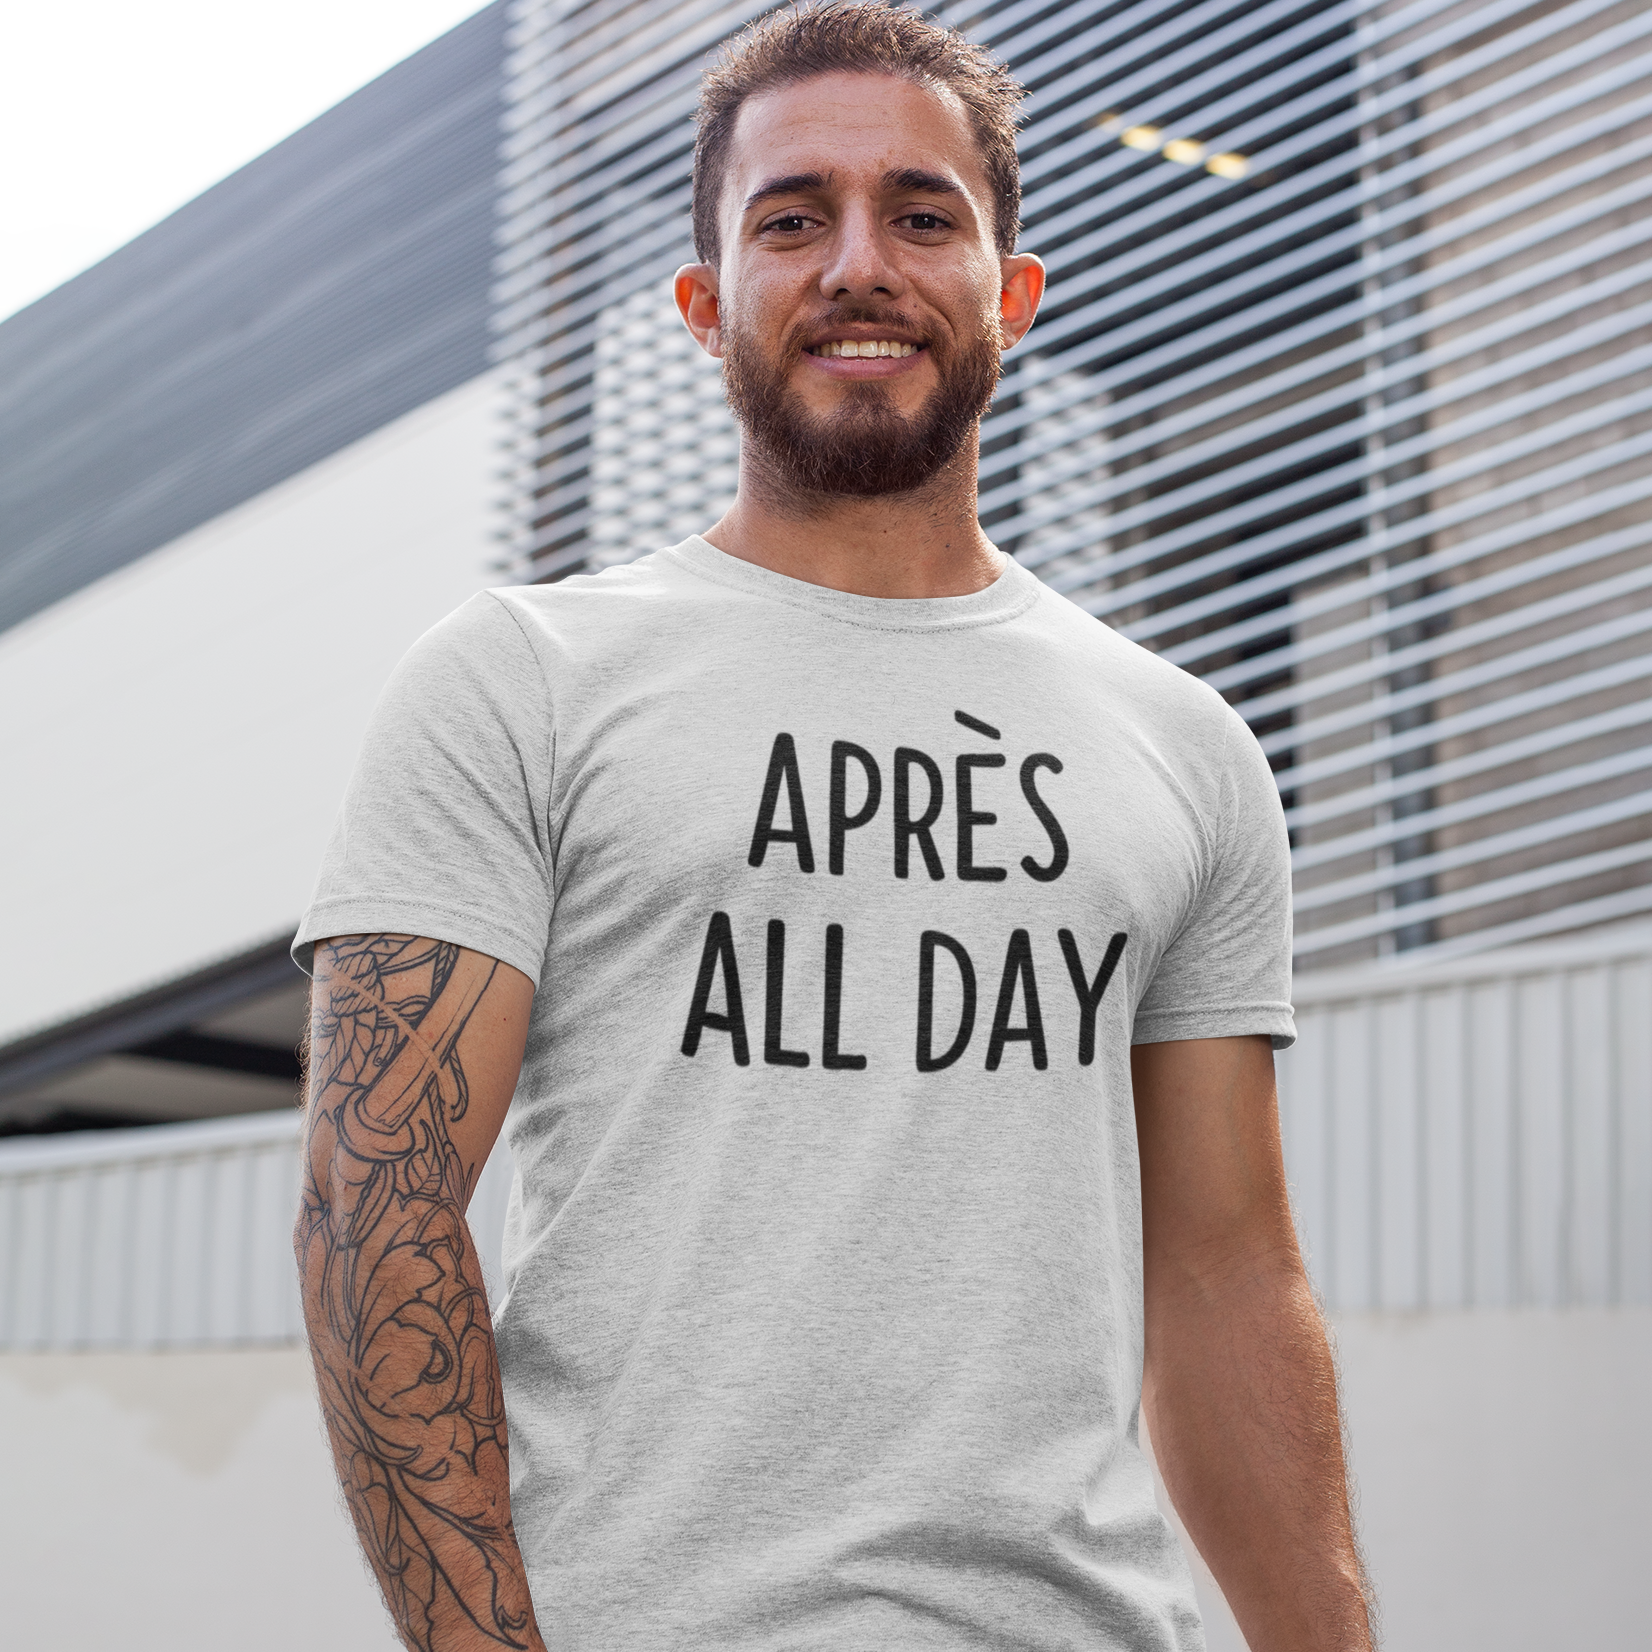 Man with beard and tattoo wearing heather grey shirt with 'Après all day' print by KMLeon.